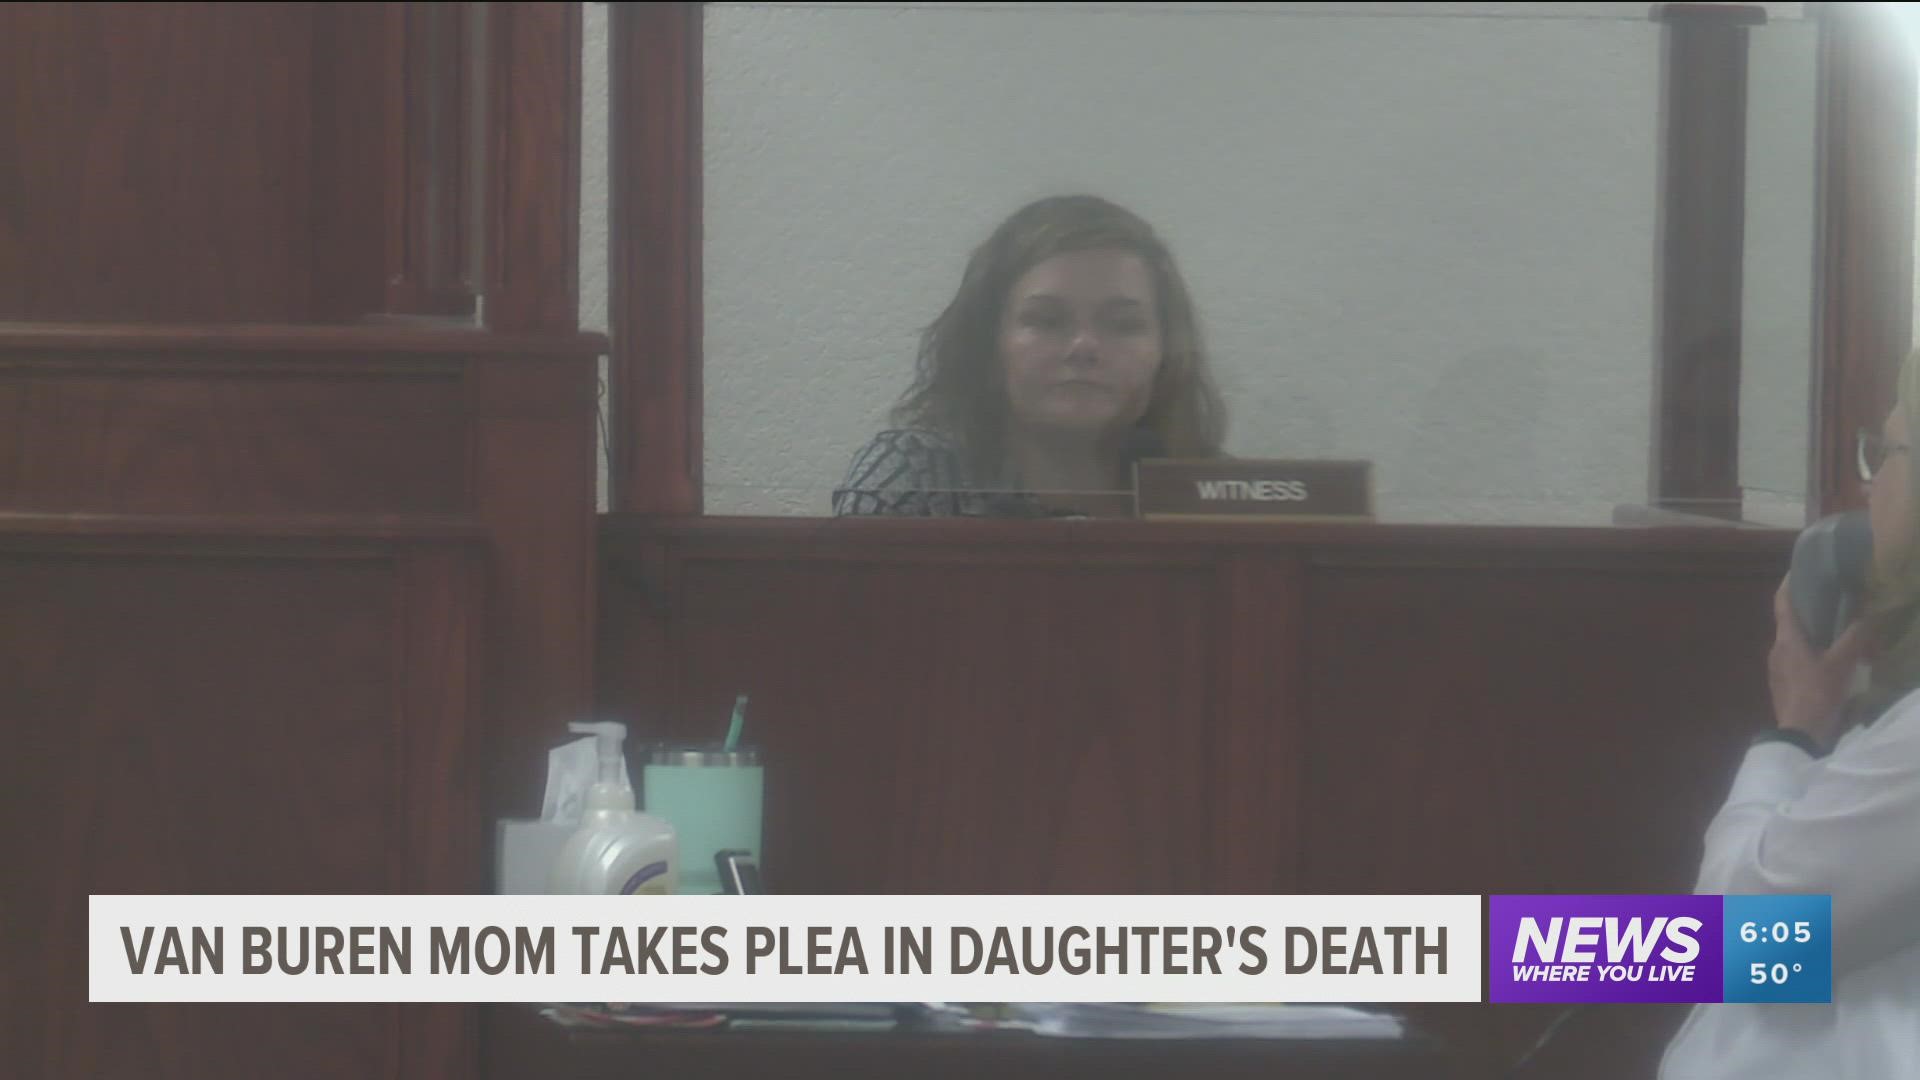 Millard's trial was initially scheduled for January 20th, but she took a plea deal Wednesday.